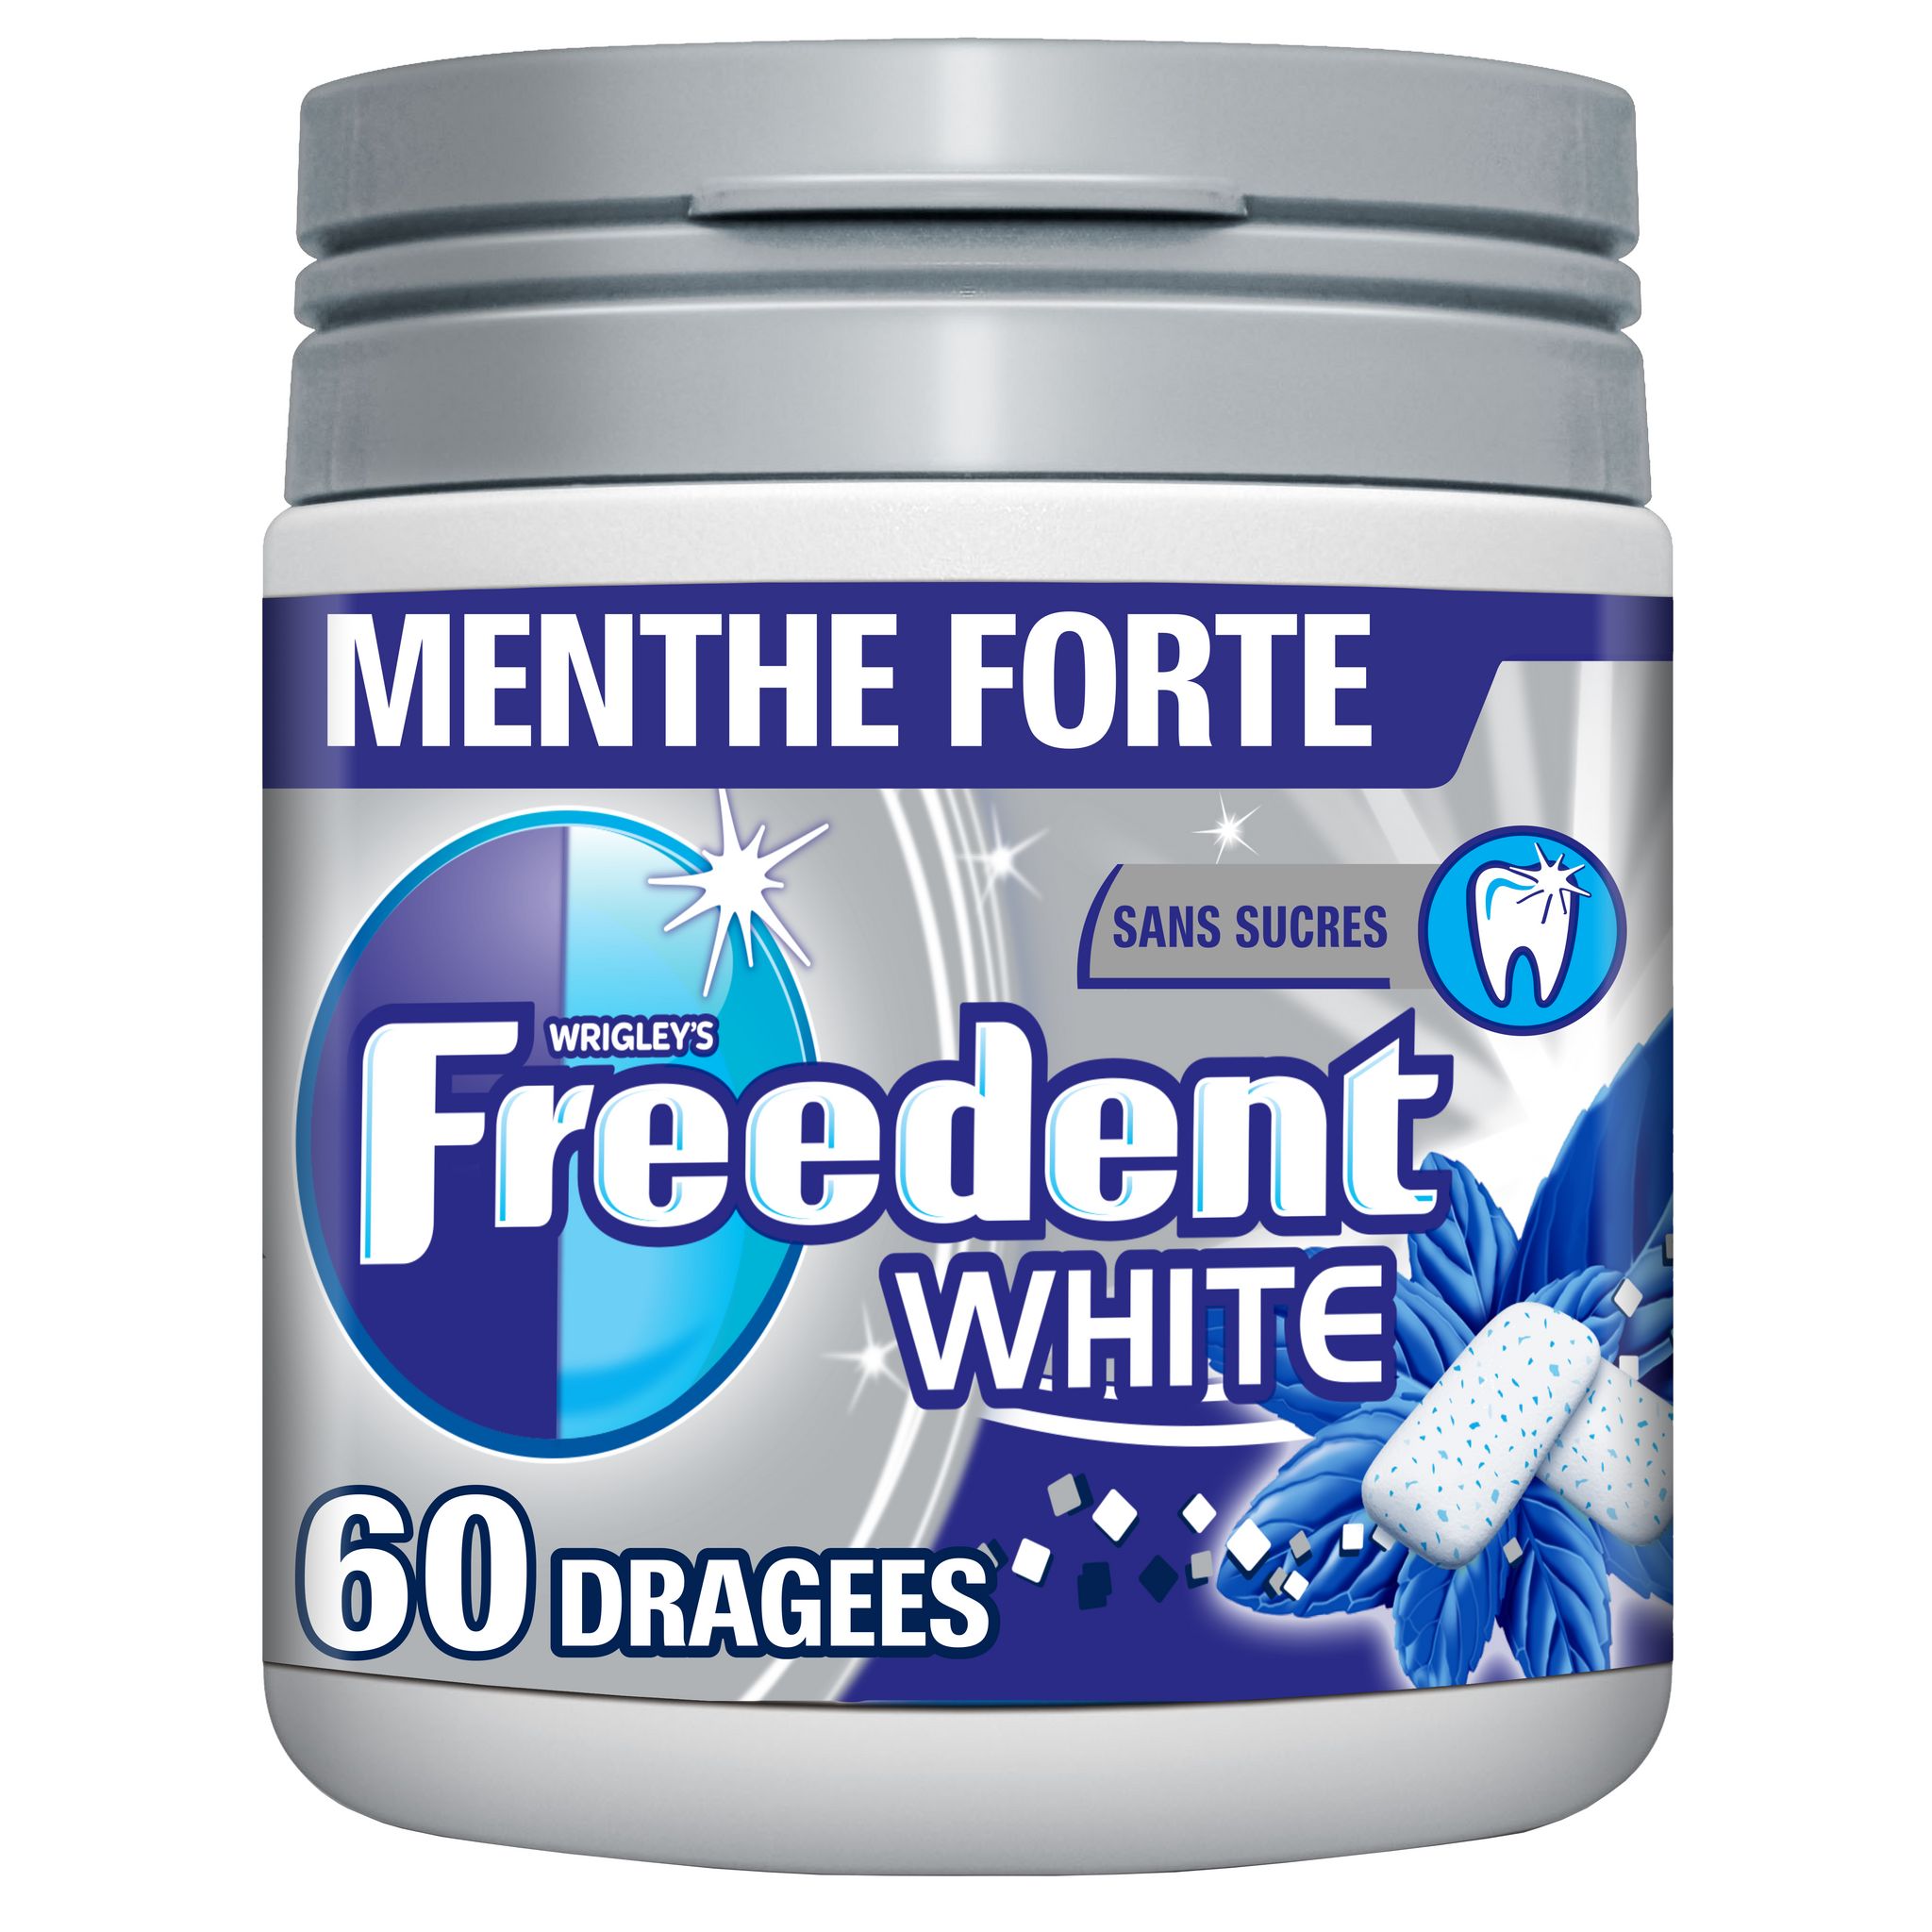 Chewing-gum menthe douce 70 g Freedent